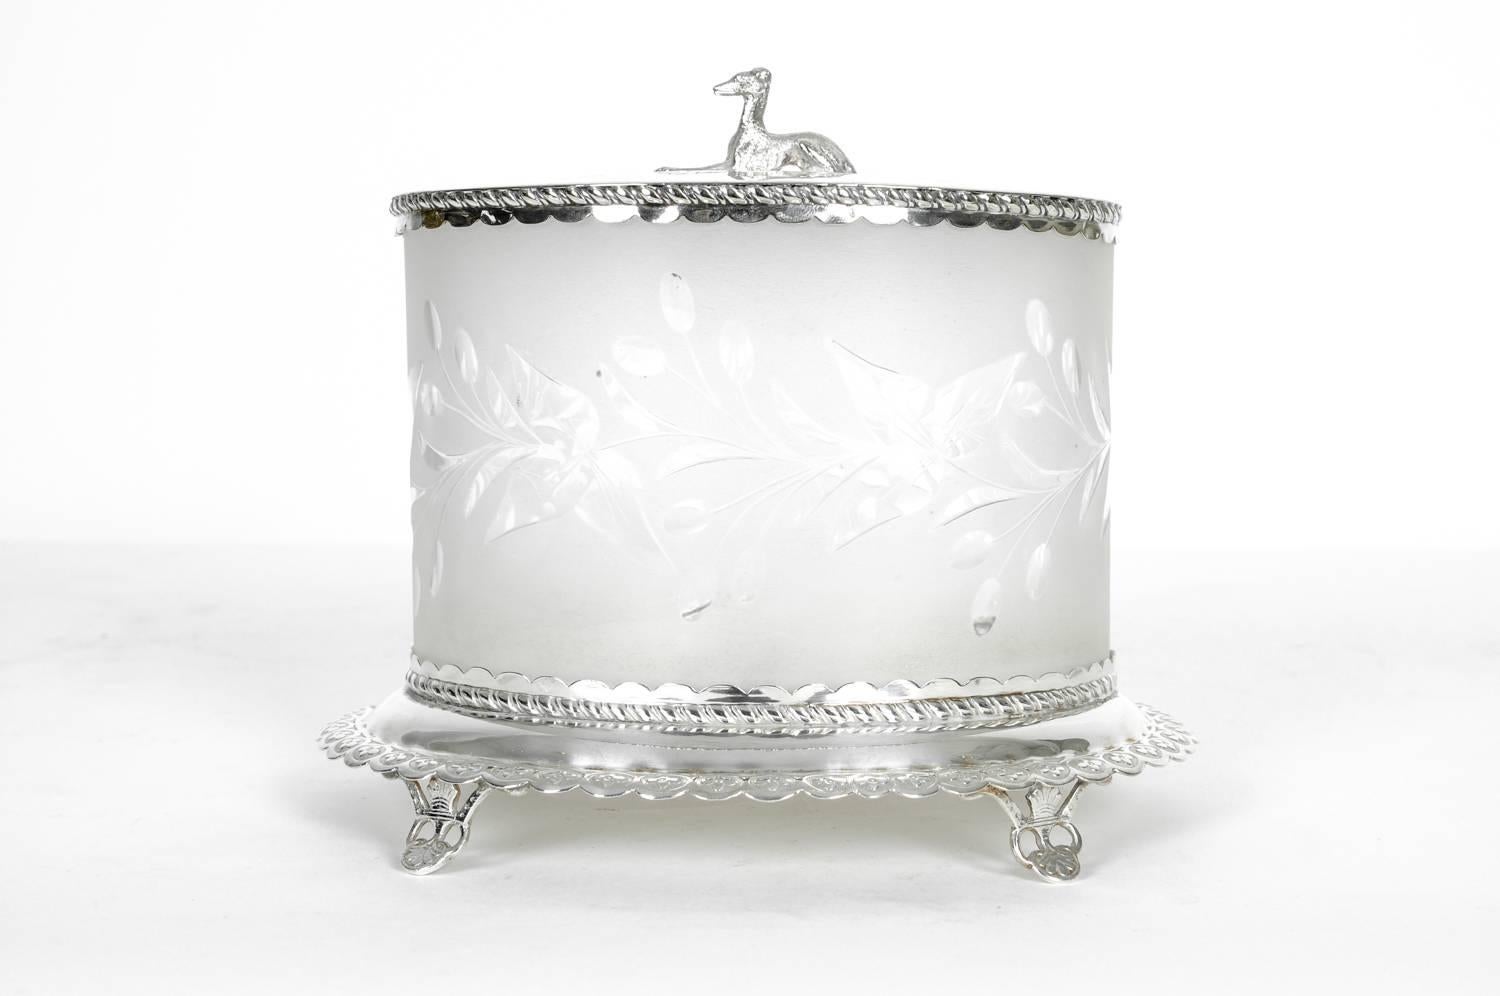 Late 19th century English oval shape cut crystal with silver plated footed holding framed / silver plated covered top with dog sculpture design details. The piece is in great condition, minor wear consistent with age / use. Maker's mark undersigned.